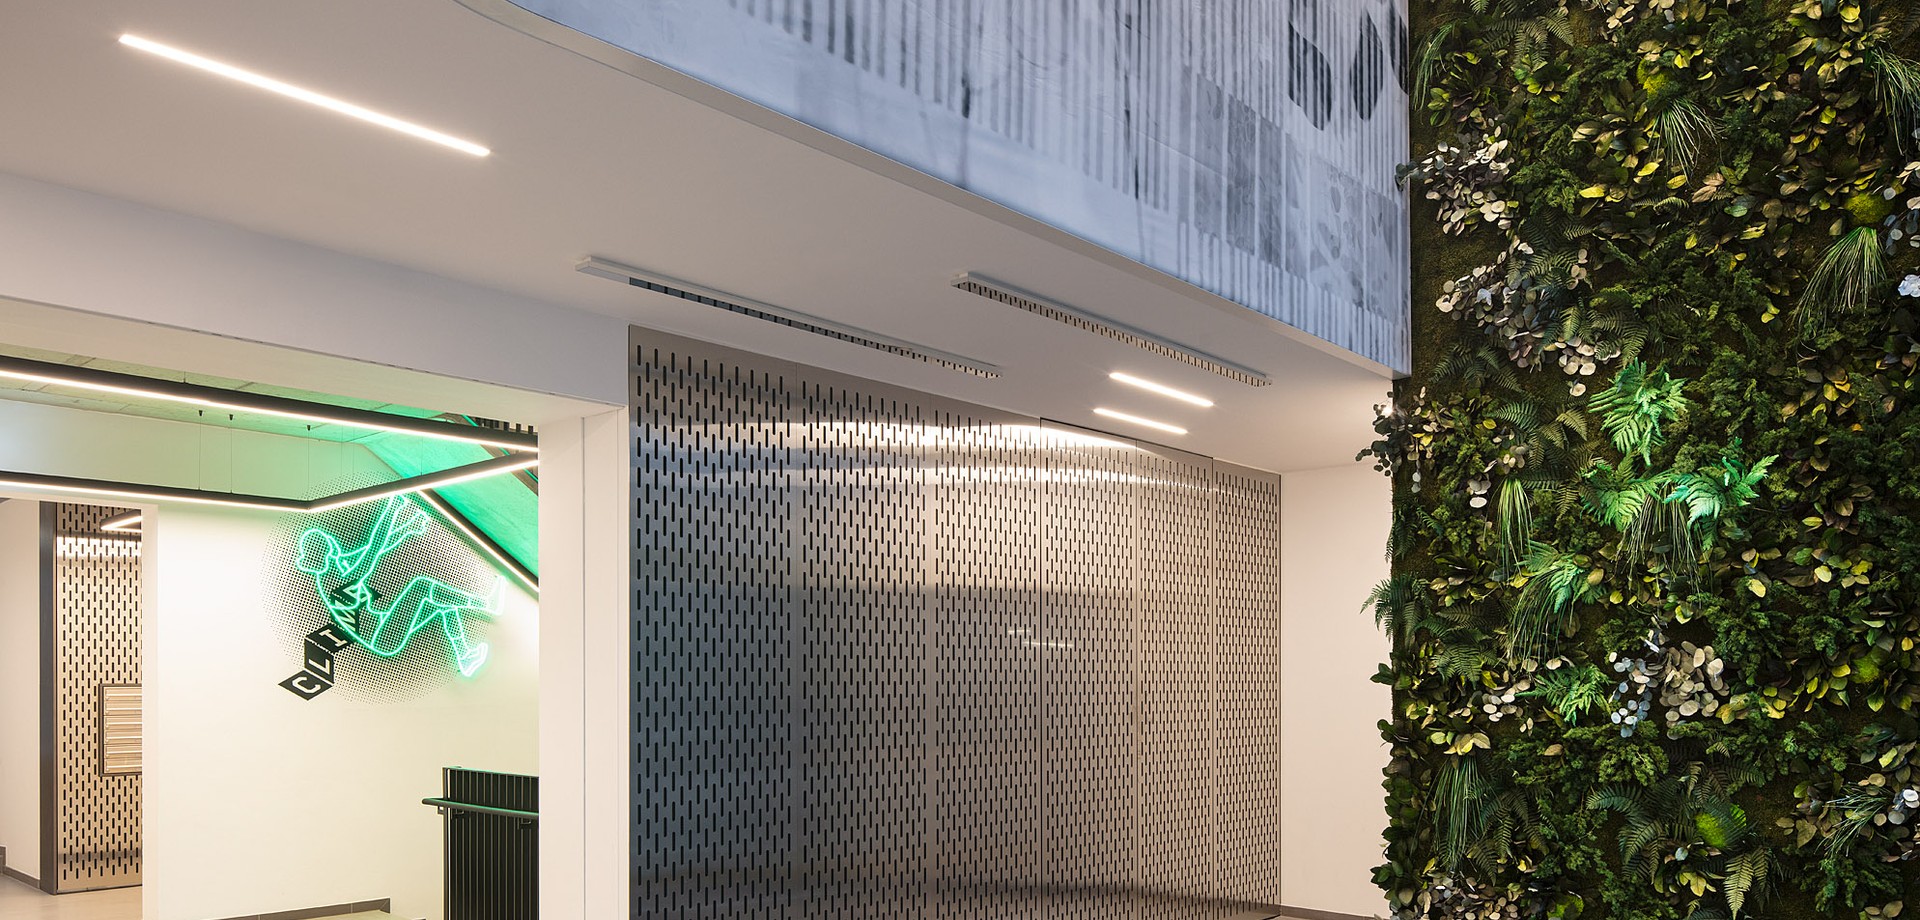 PANDION OFFICEHOME The Grid Foyer.jpg
				